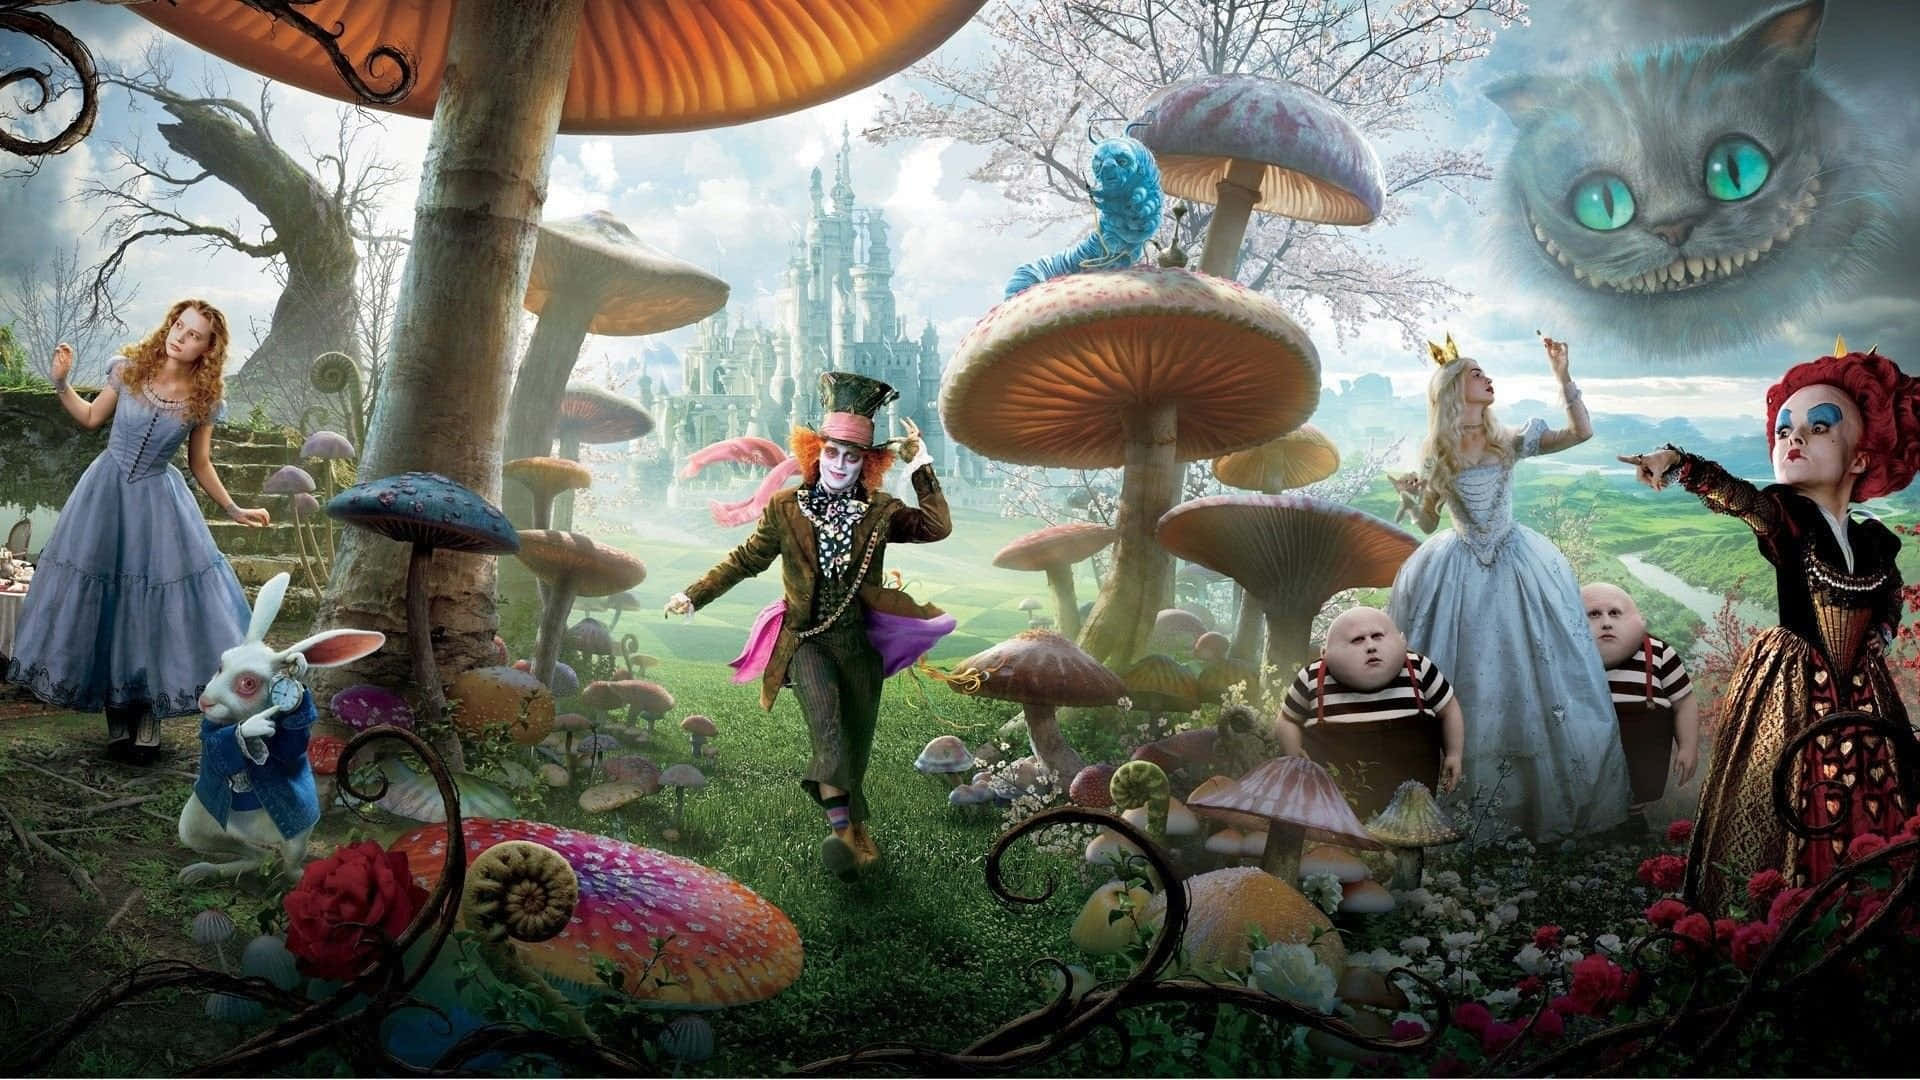 An Endless Dreamy Journey With Alice In Wonderland Wallpaper